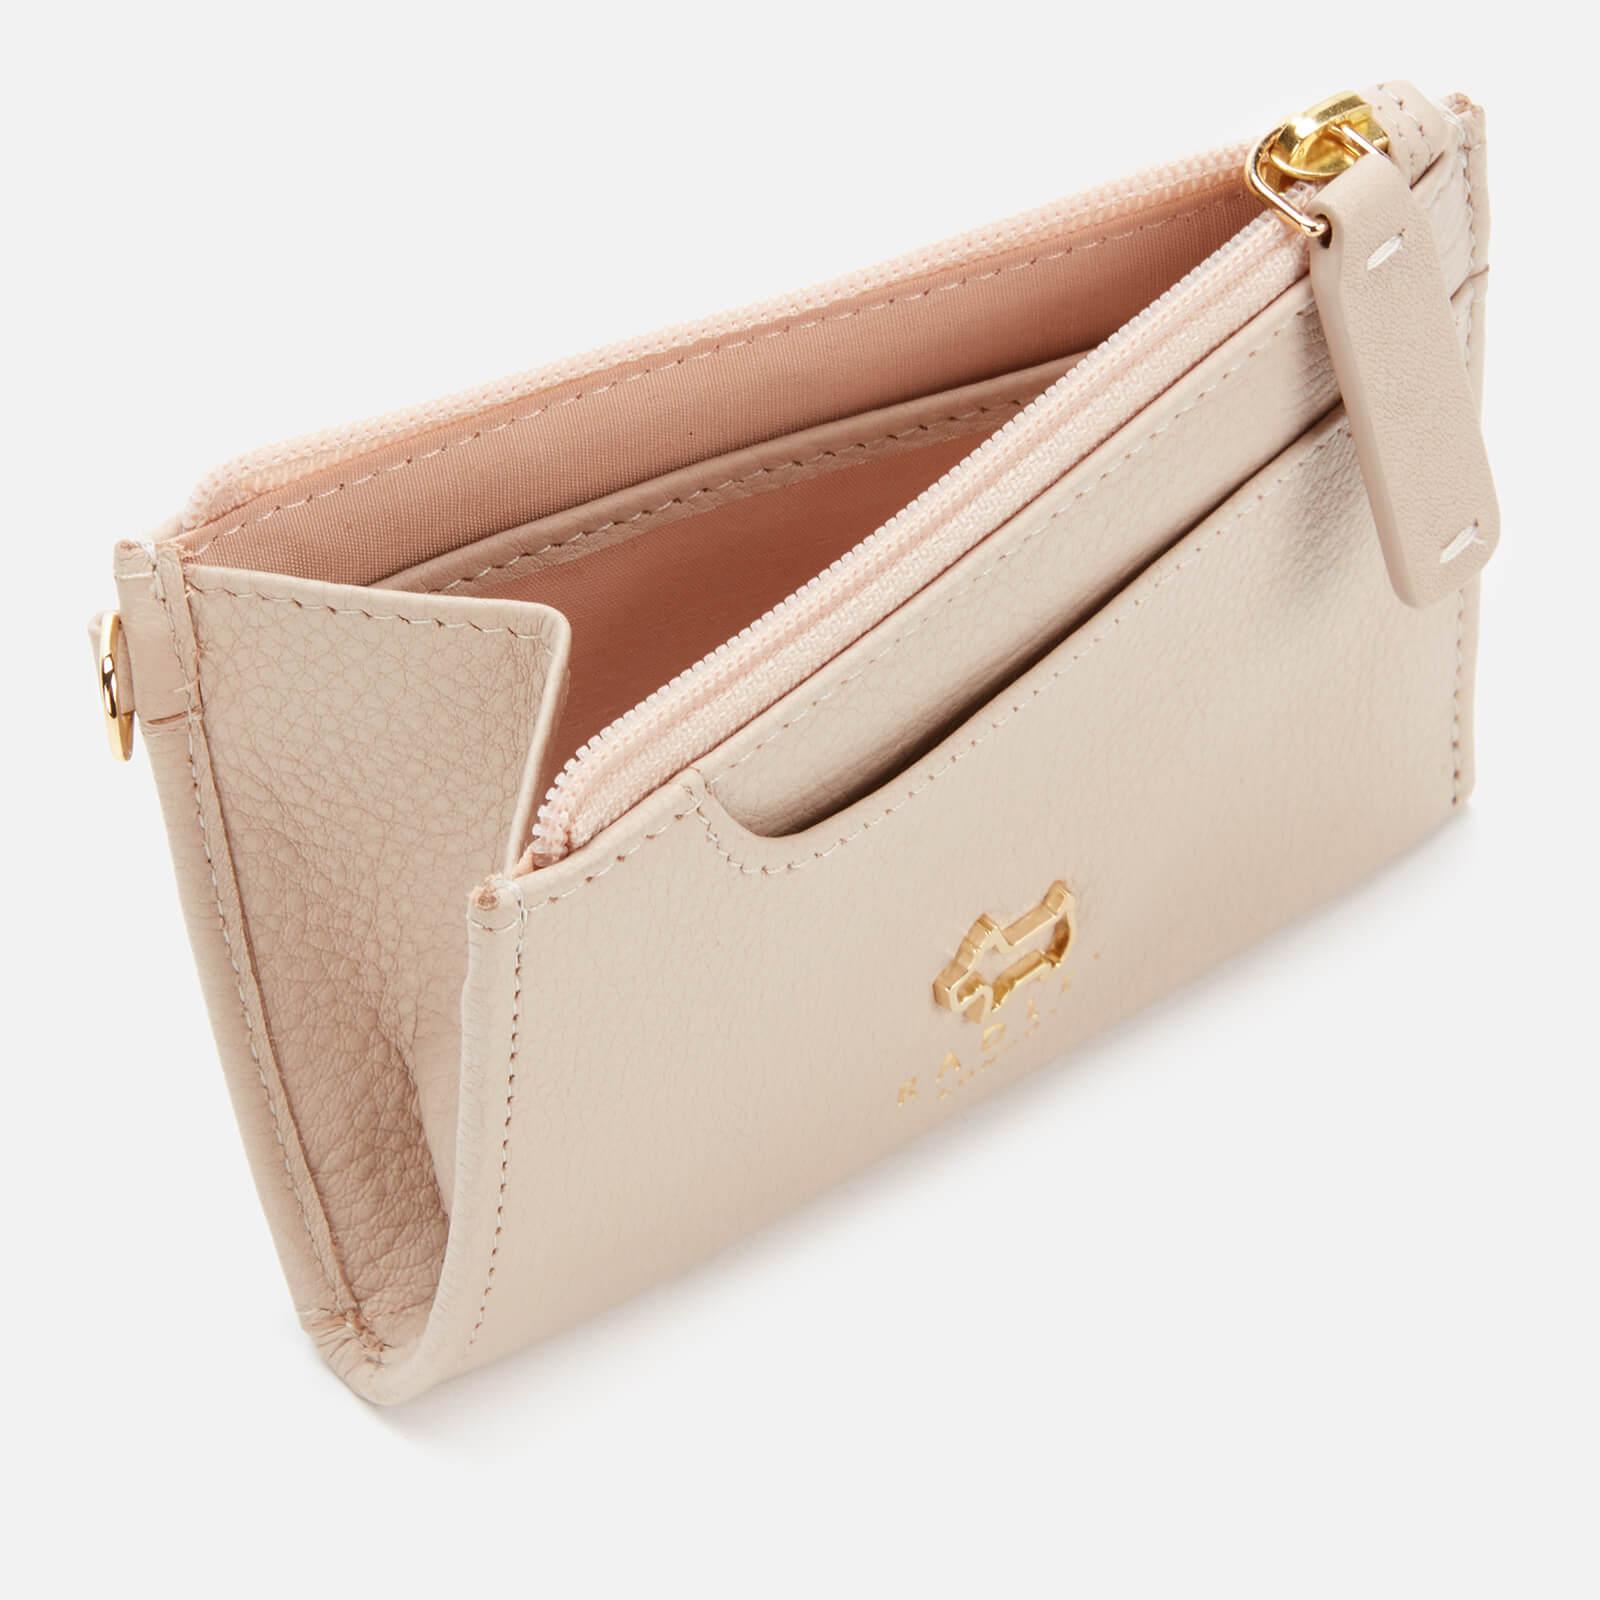 Radley Pockets Small Zip Top Coin Purse in Natural | Lyst